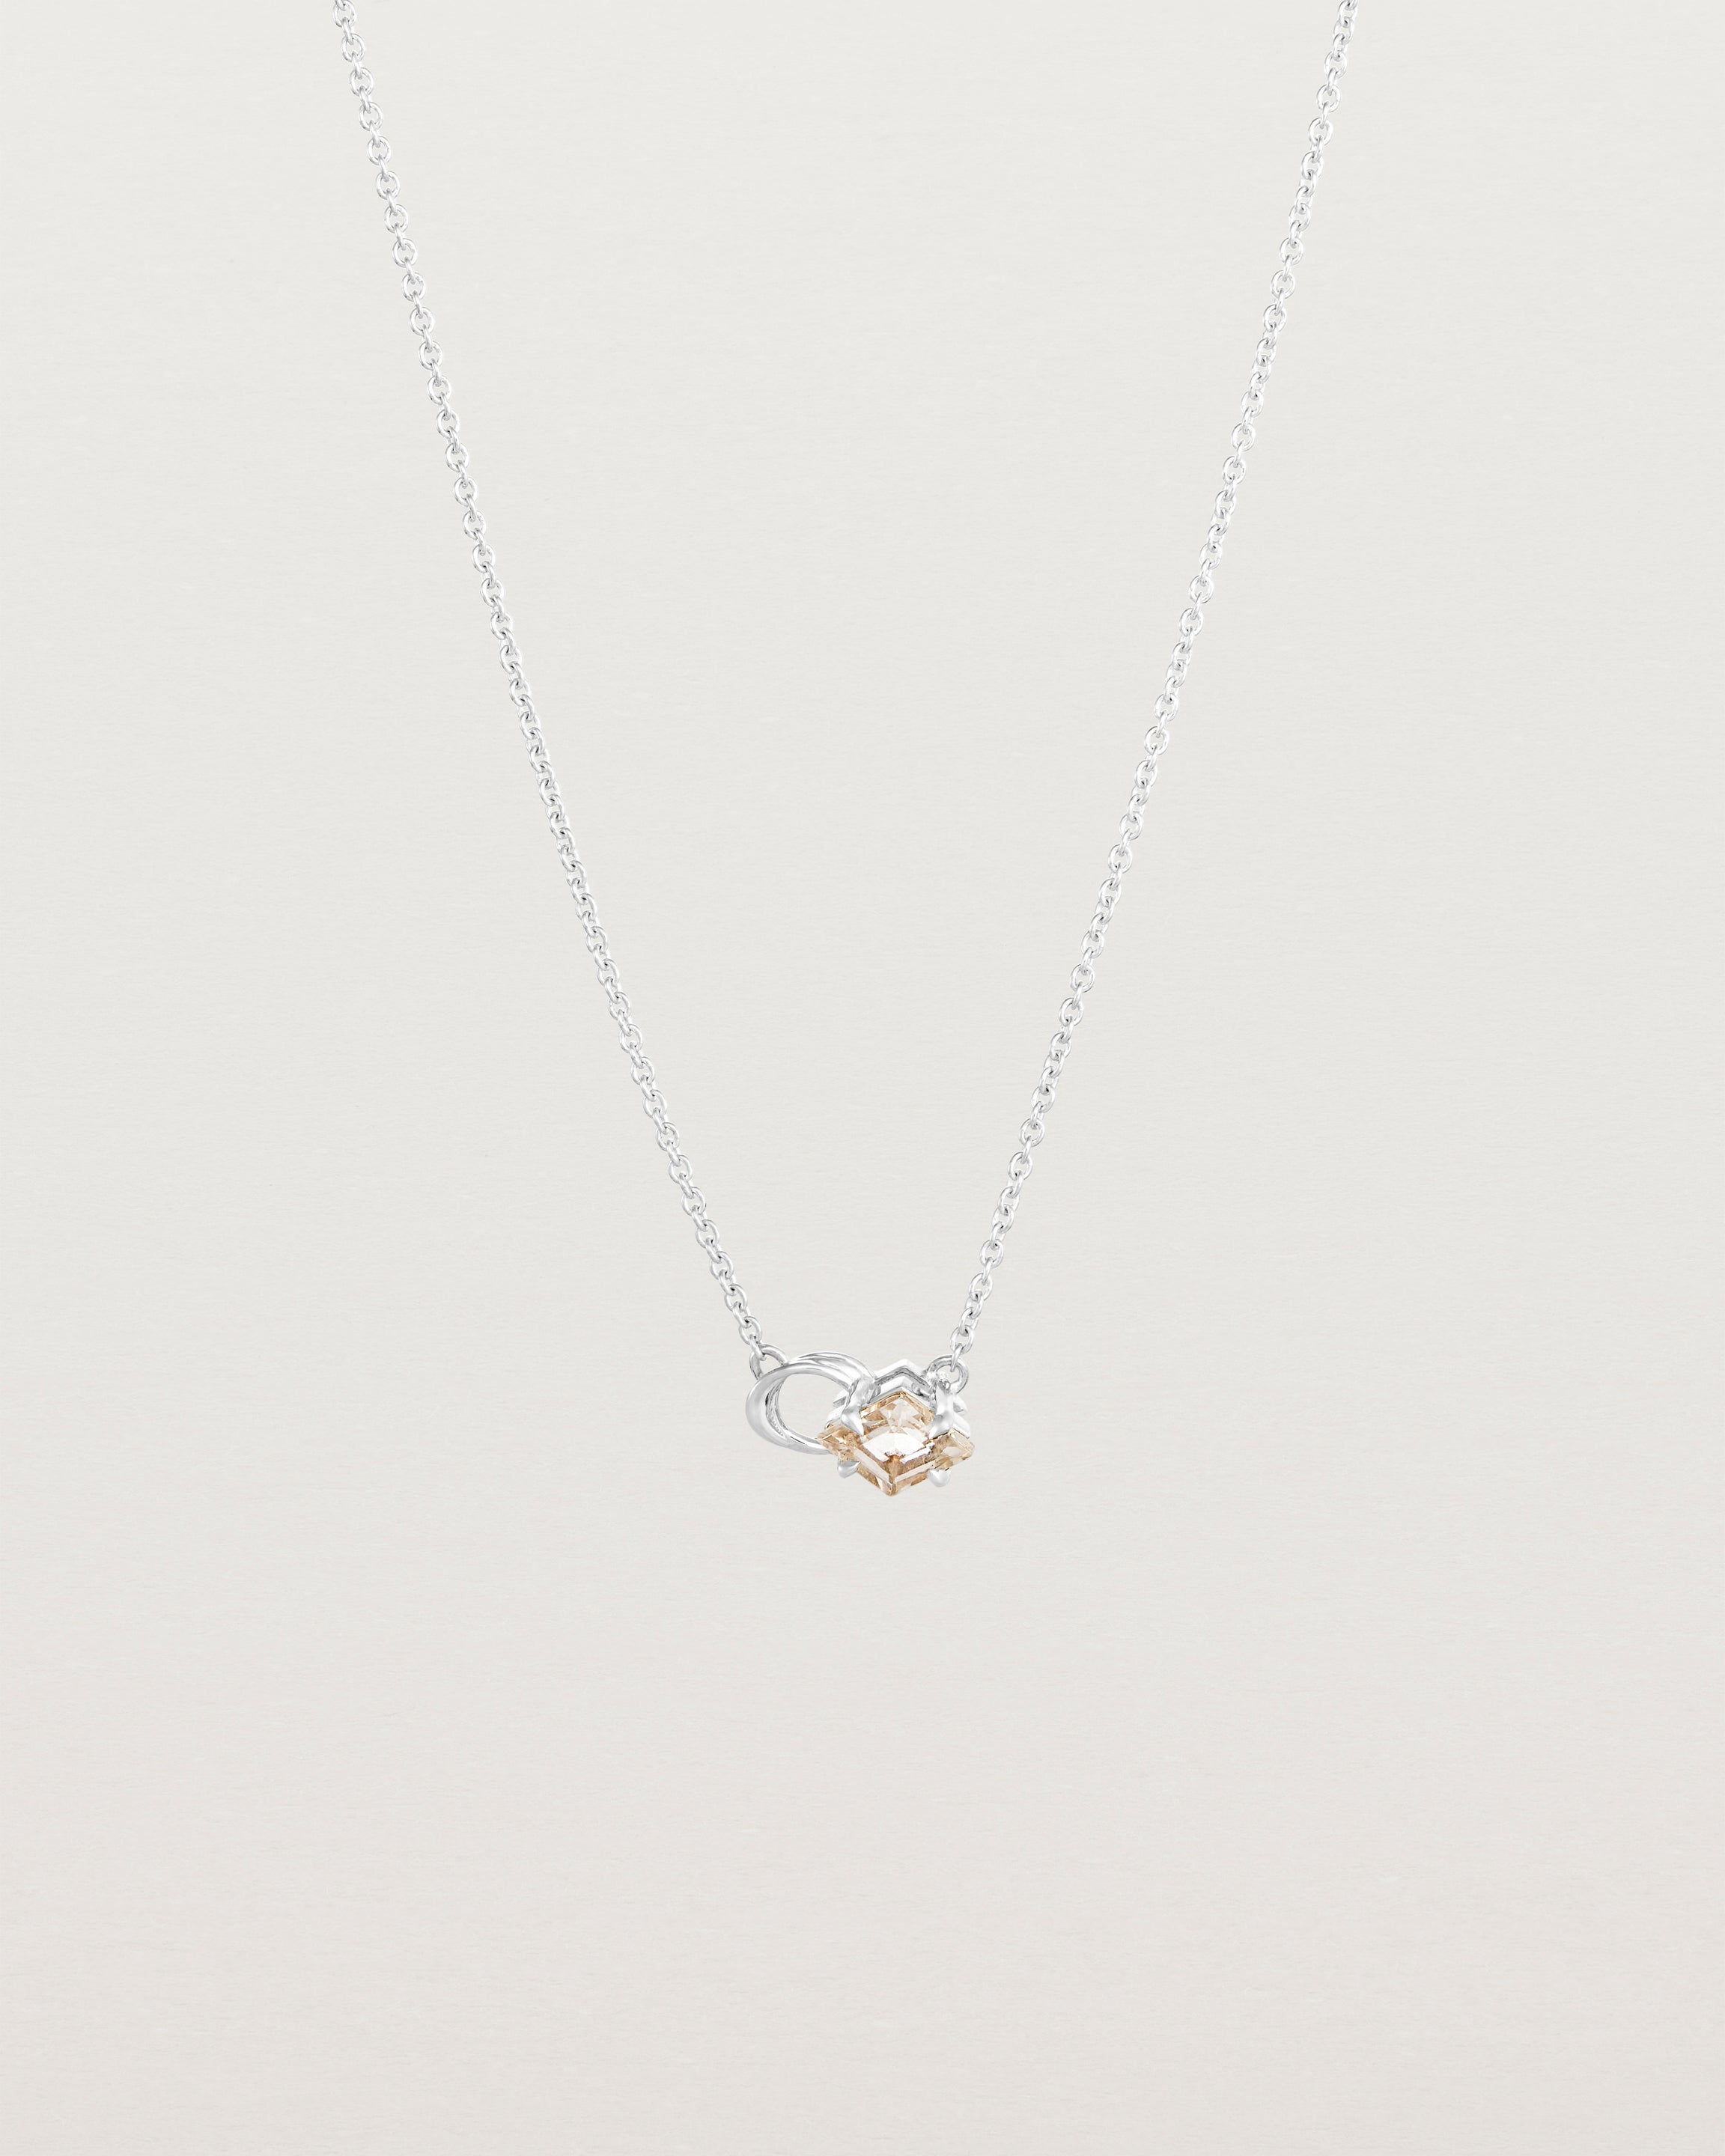 Front view of the Nuna Necklace | Savannah Sunstone in sterling silver.